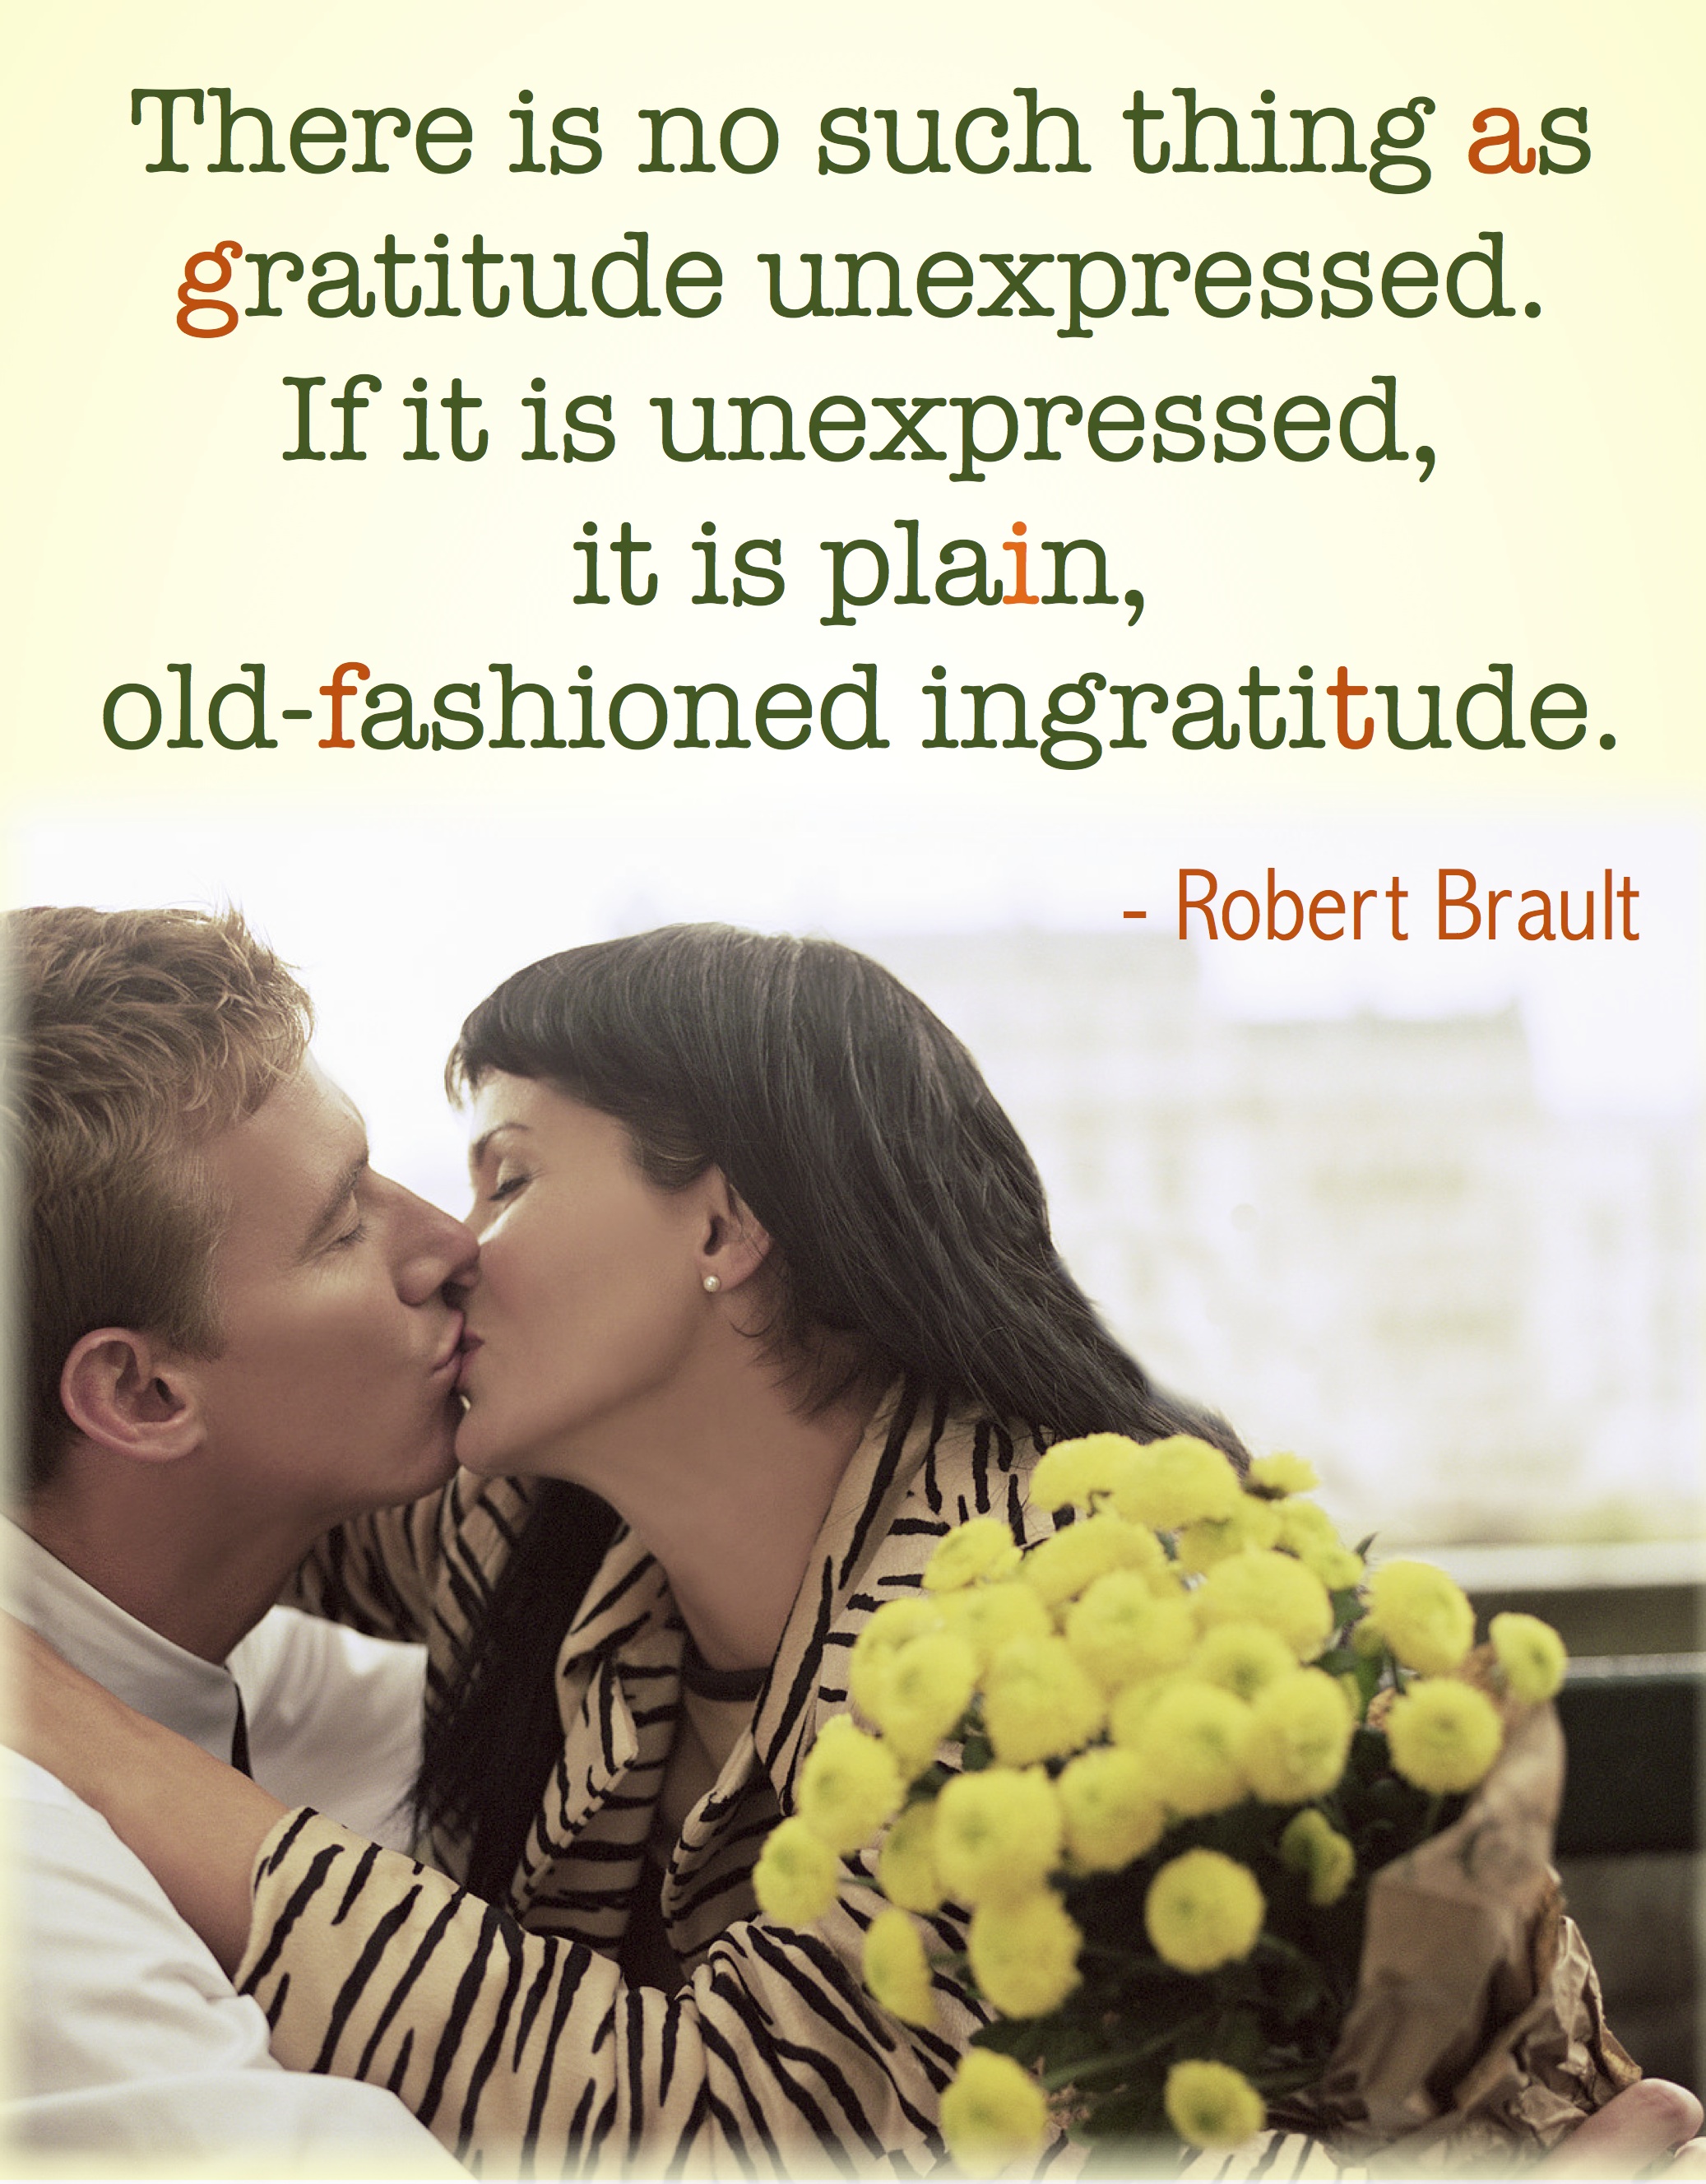 "There is no such thing as gratitude unexpressed. If it is unexpressed, it is plain, old-fashioned ingratitude." - Robert Brault